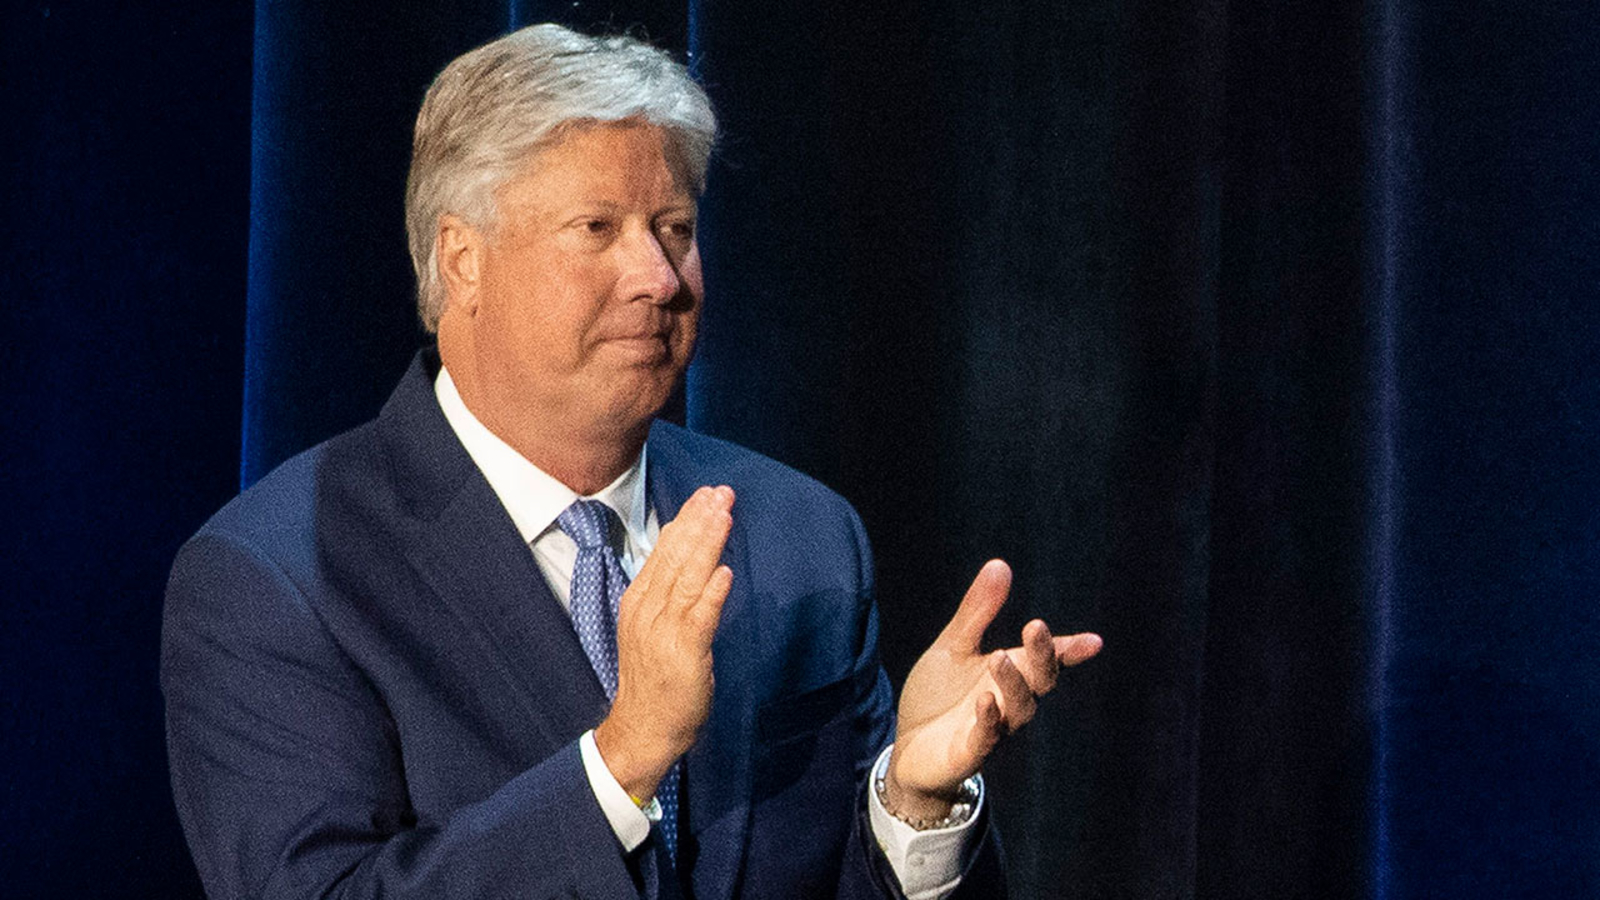 Dallas-area megachurch pastor Robert Morris resigns from Gateway Church after Wartburg Watch publishes sexual abuse allegations [Video]